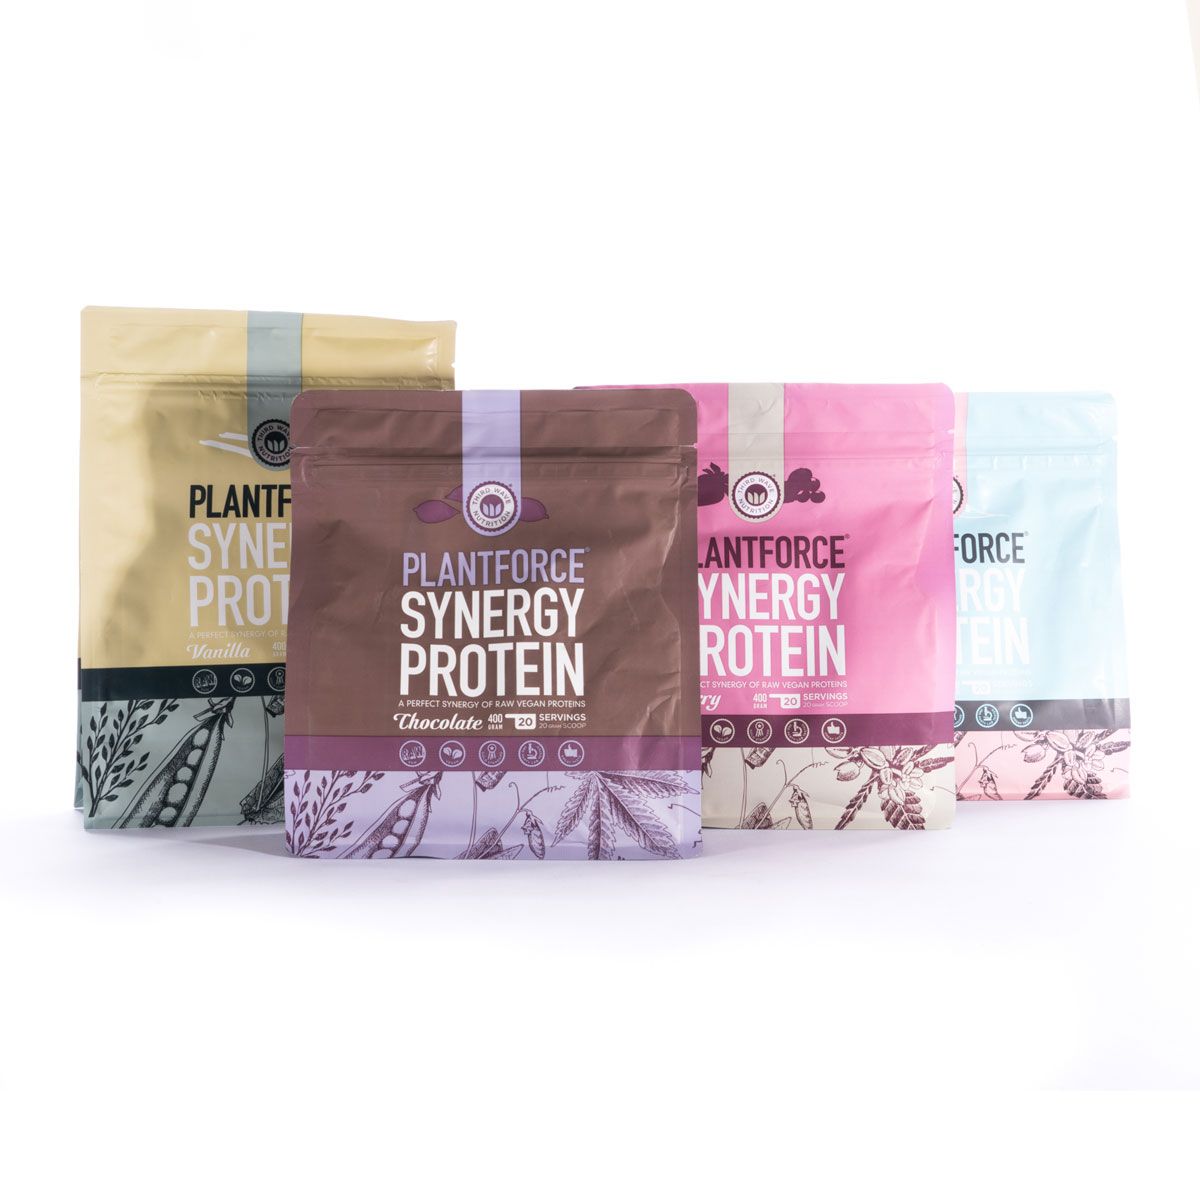 Plantforce Synergy Protein 400g - HealthyLiving.ie